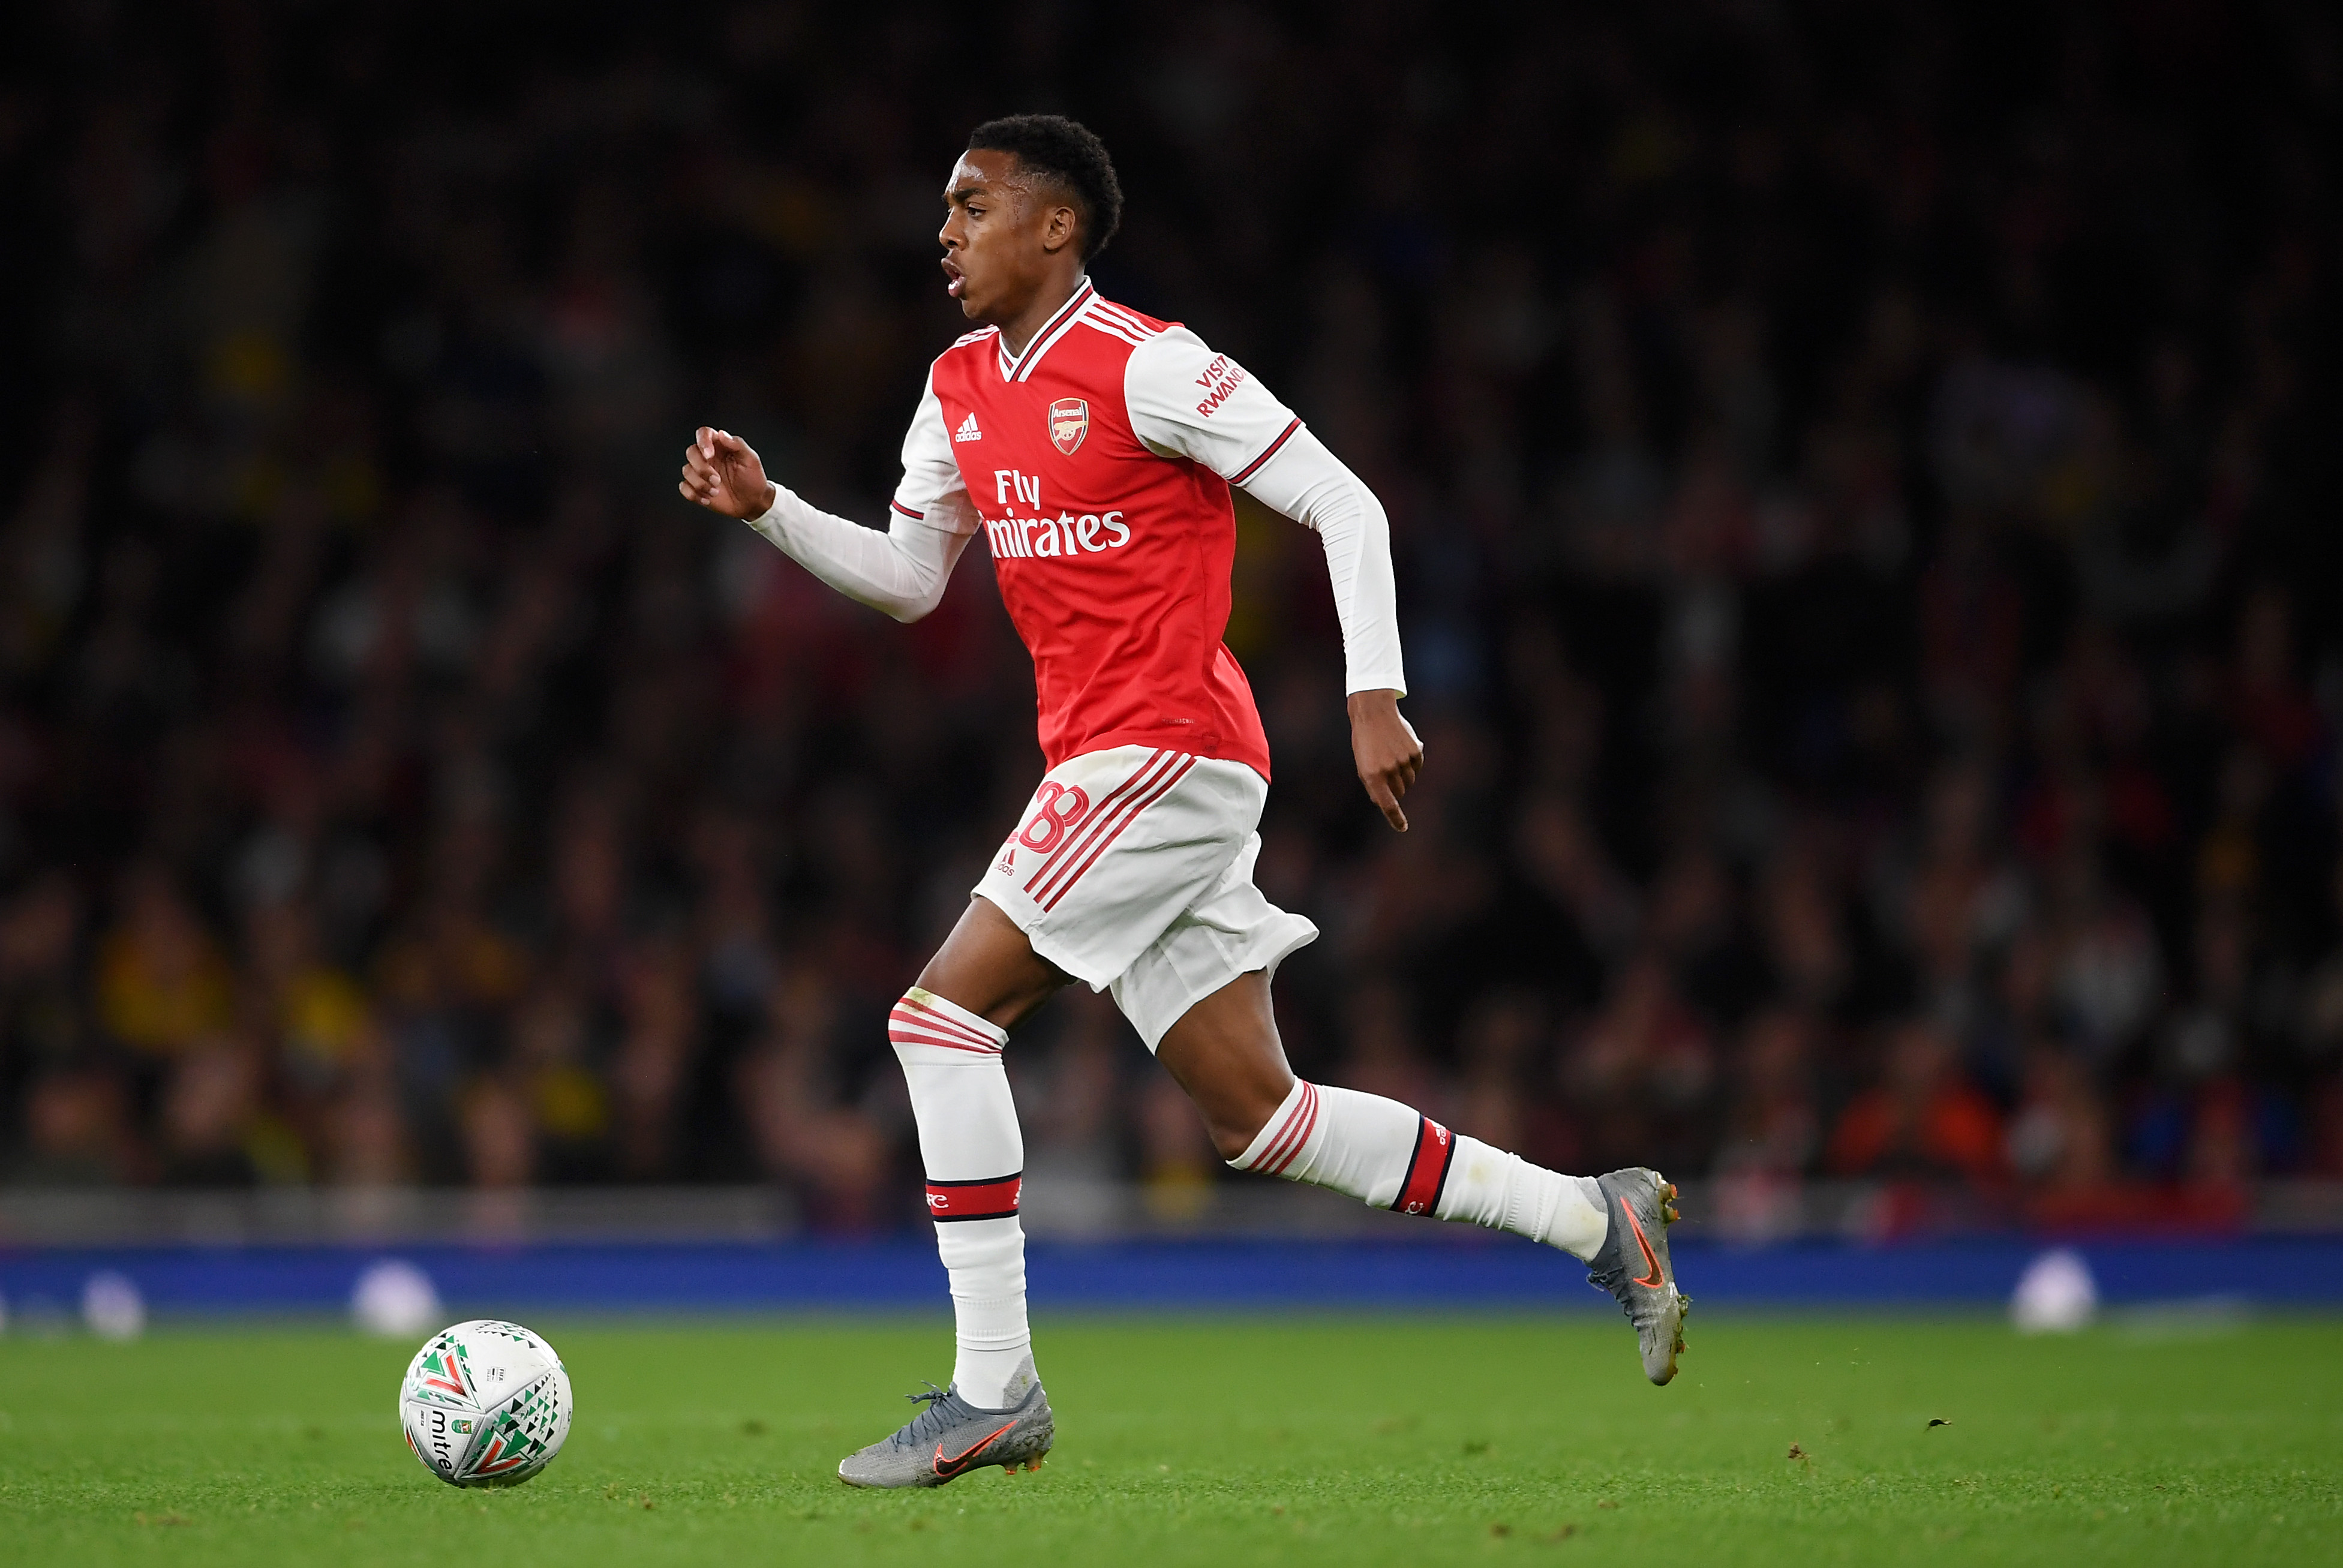 LONDON, ENGLAND - SEPTEMBER 24: Joe Willock of Arsenal runs with the ball during the Carabao Cup Third Round match between Arsenal and Nottingham Forest at Emirates Stadium on September 24, 2019 in London, England. (Photo by Laurence Griffiths/Getty Images)